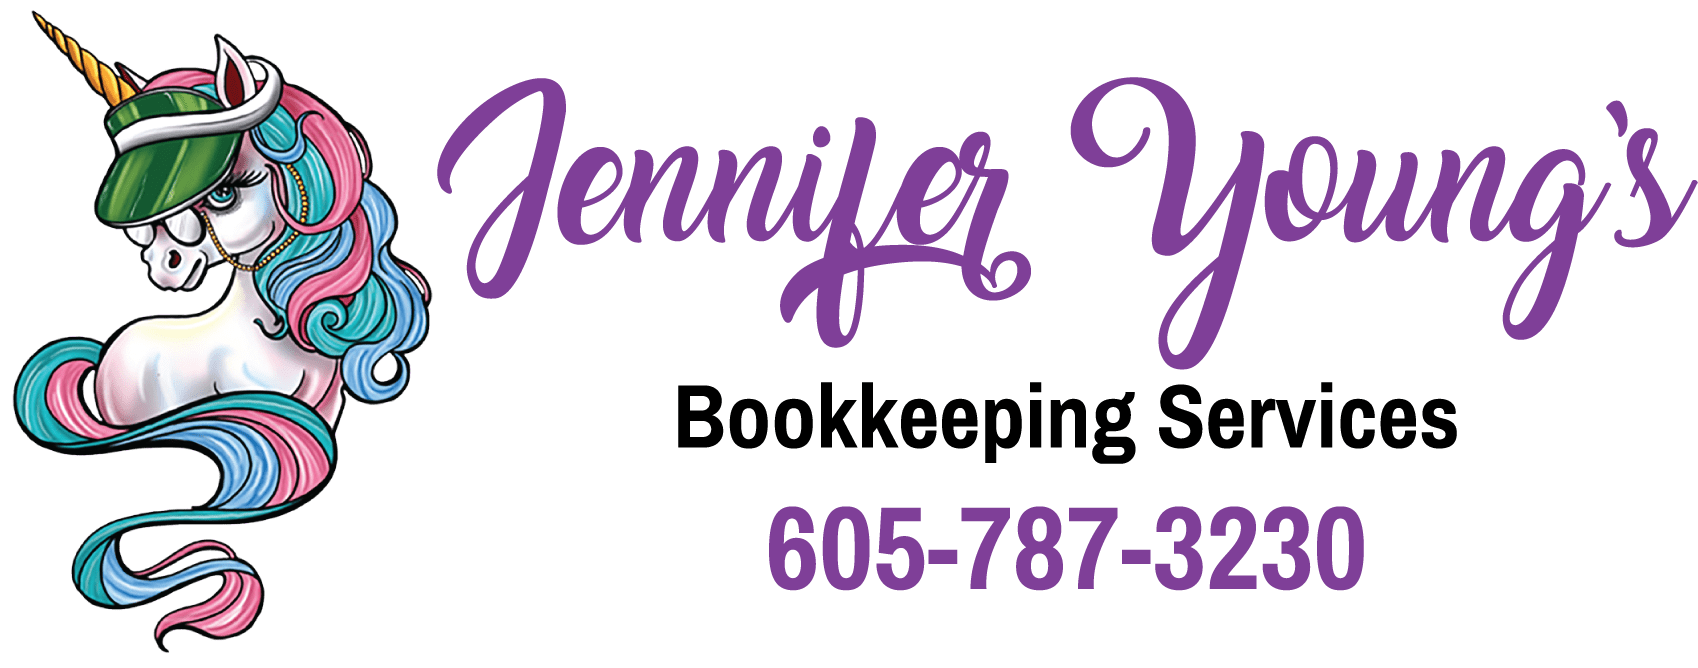 Jennifer Young's Bookkeeping Services Logo Purple